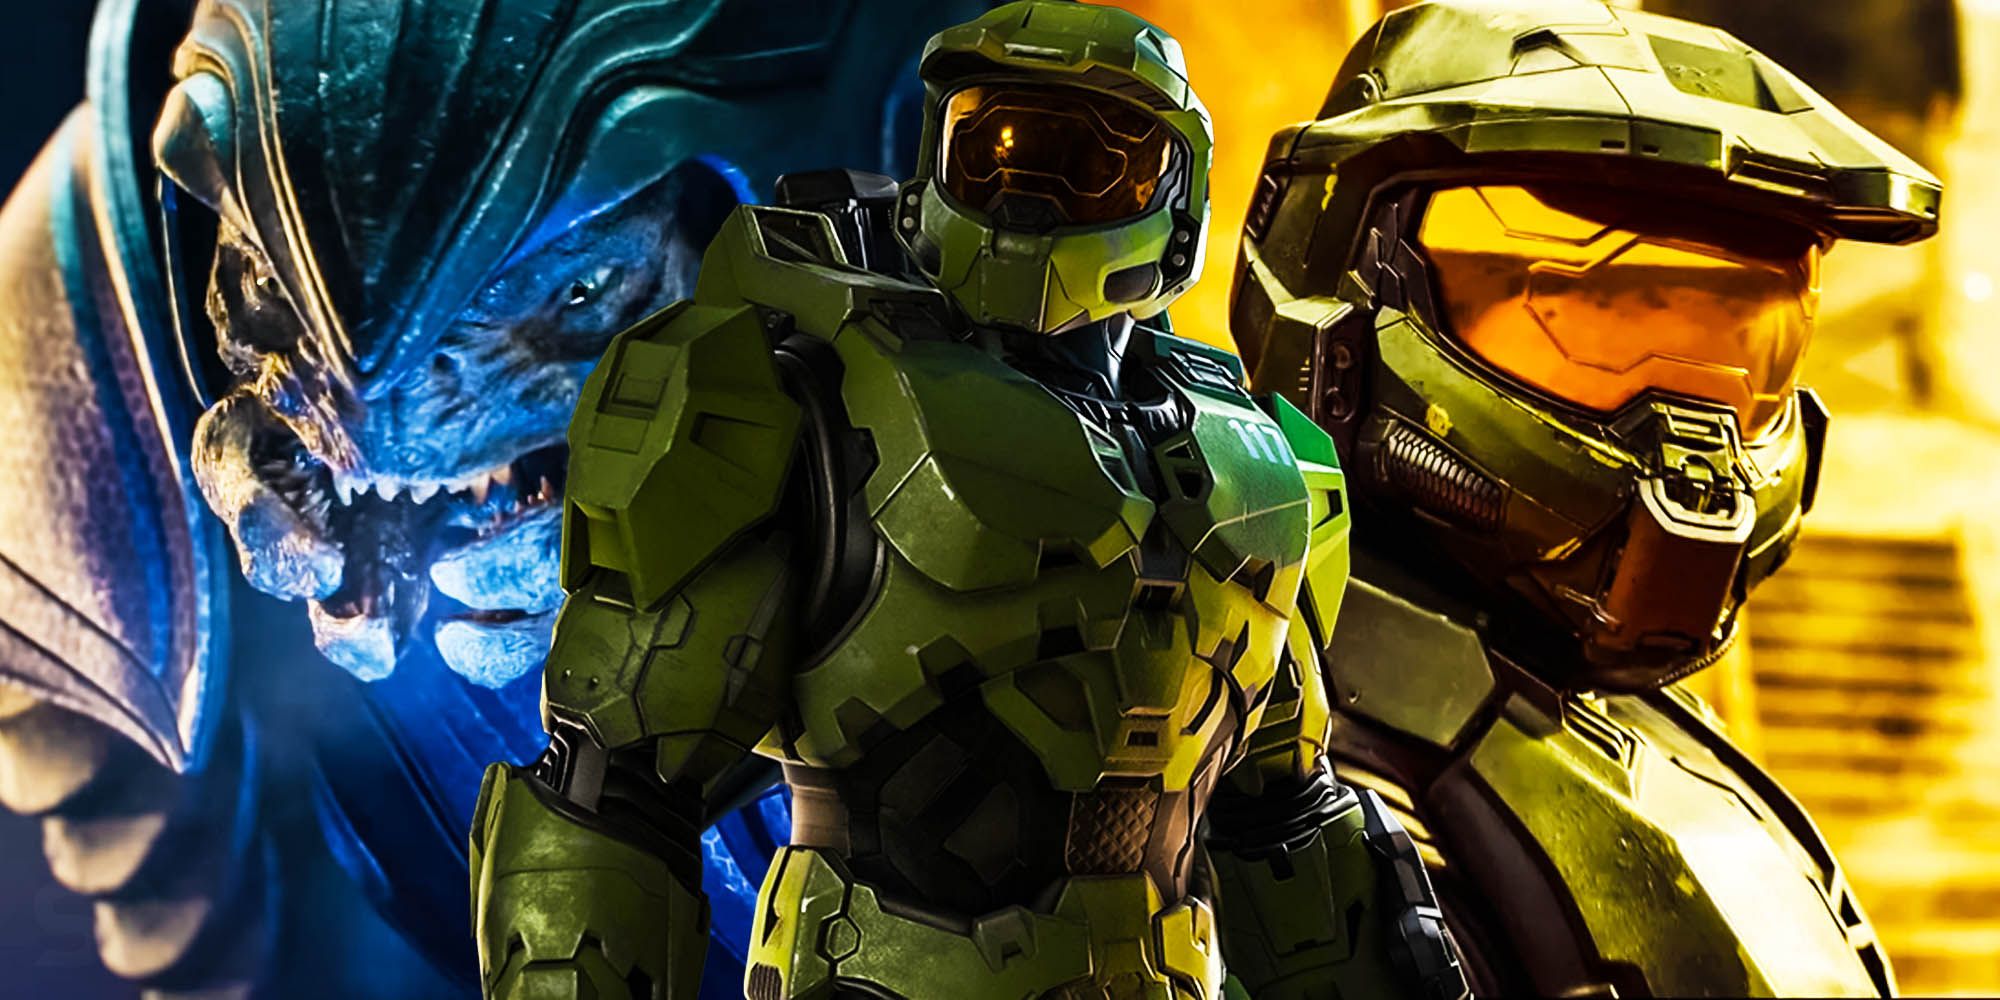 Halo' Review: Video Game Makes Decent, If Familiar TV Adaptation